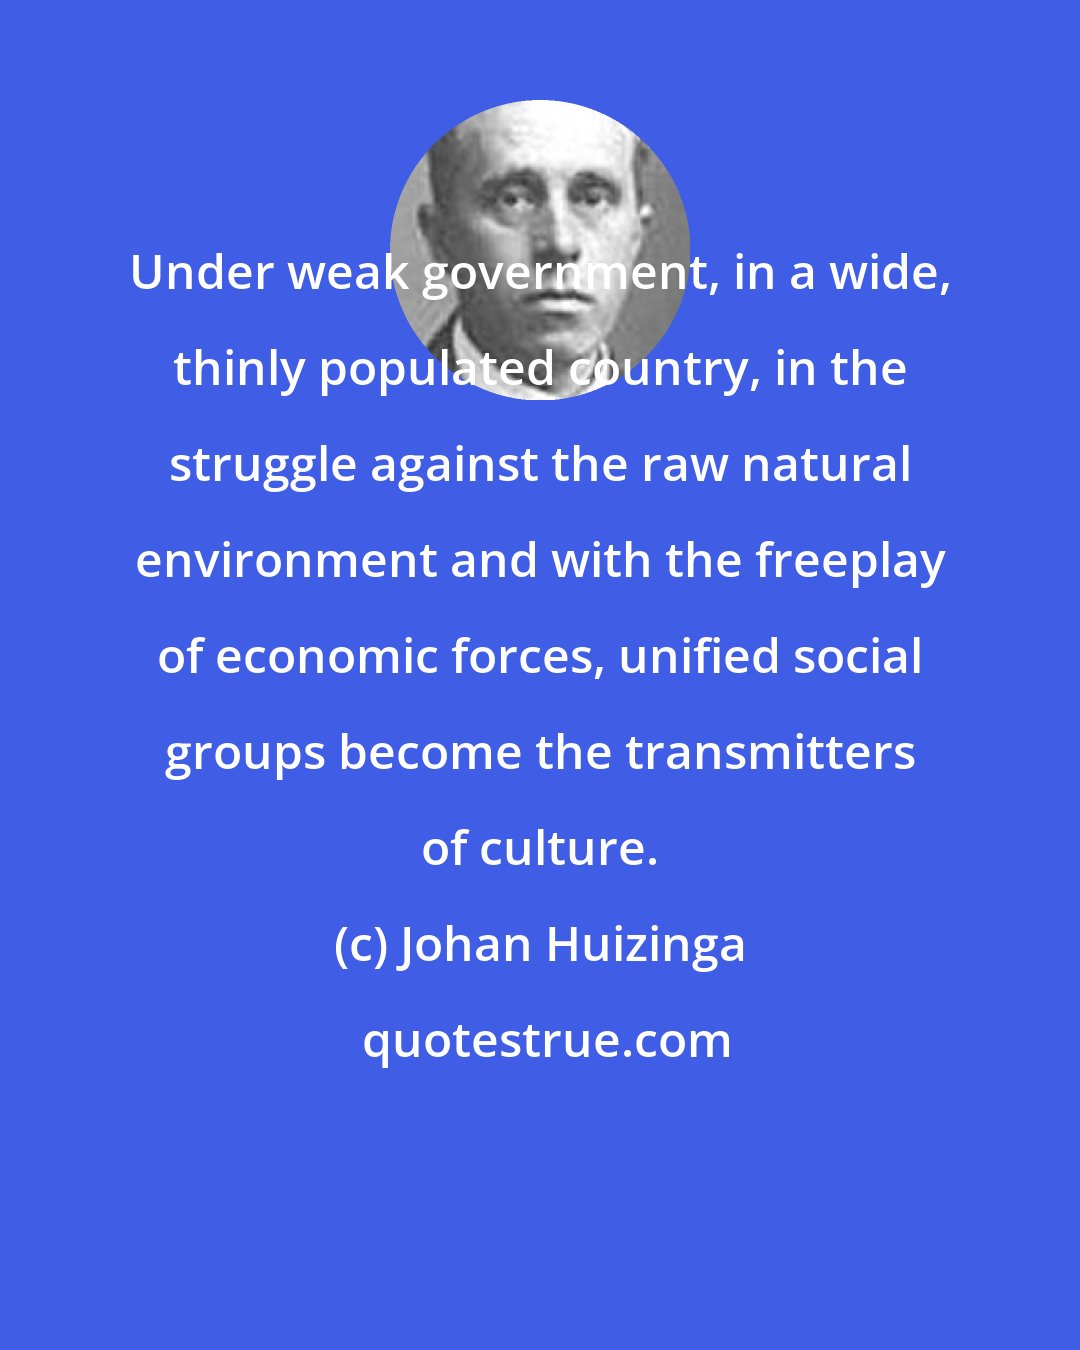 Johan Huizinga: Under weak government, in a wide, thinly populated country, in the struggle against the raw natural environment and with the freeplay of economic forces, unified social groups become the transmitters of culture.